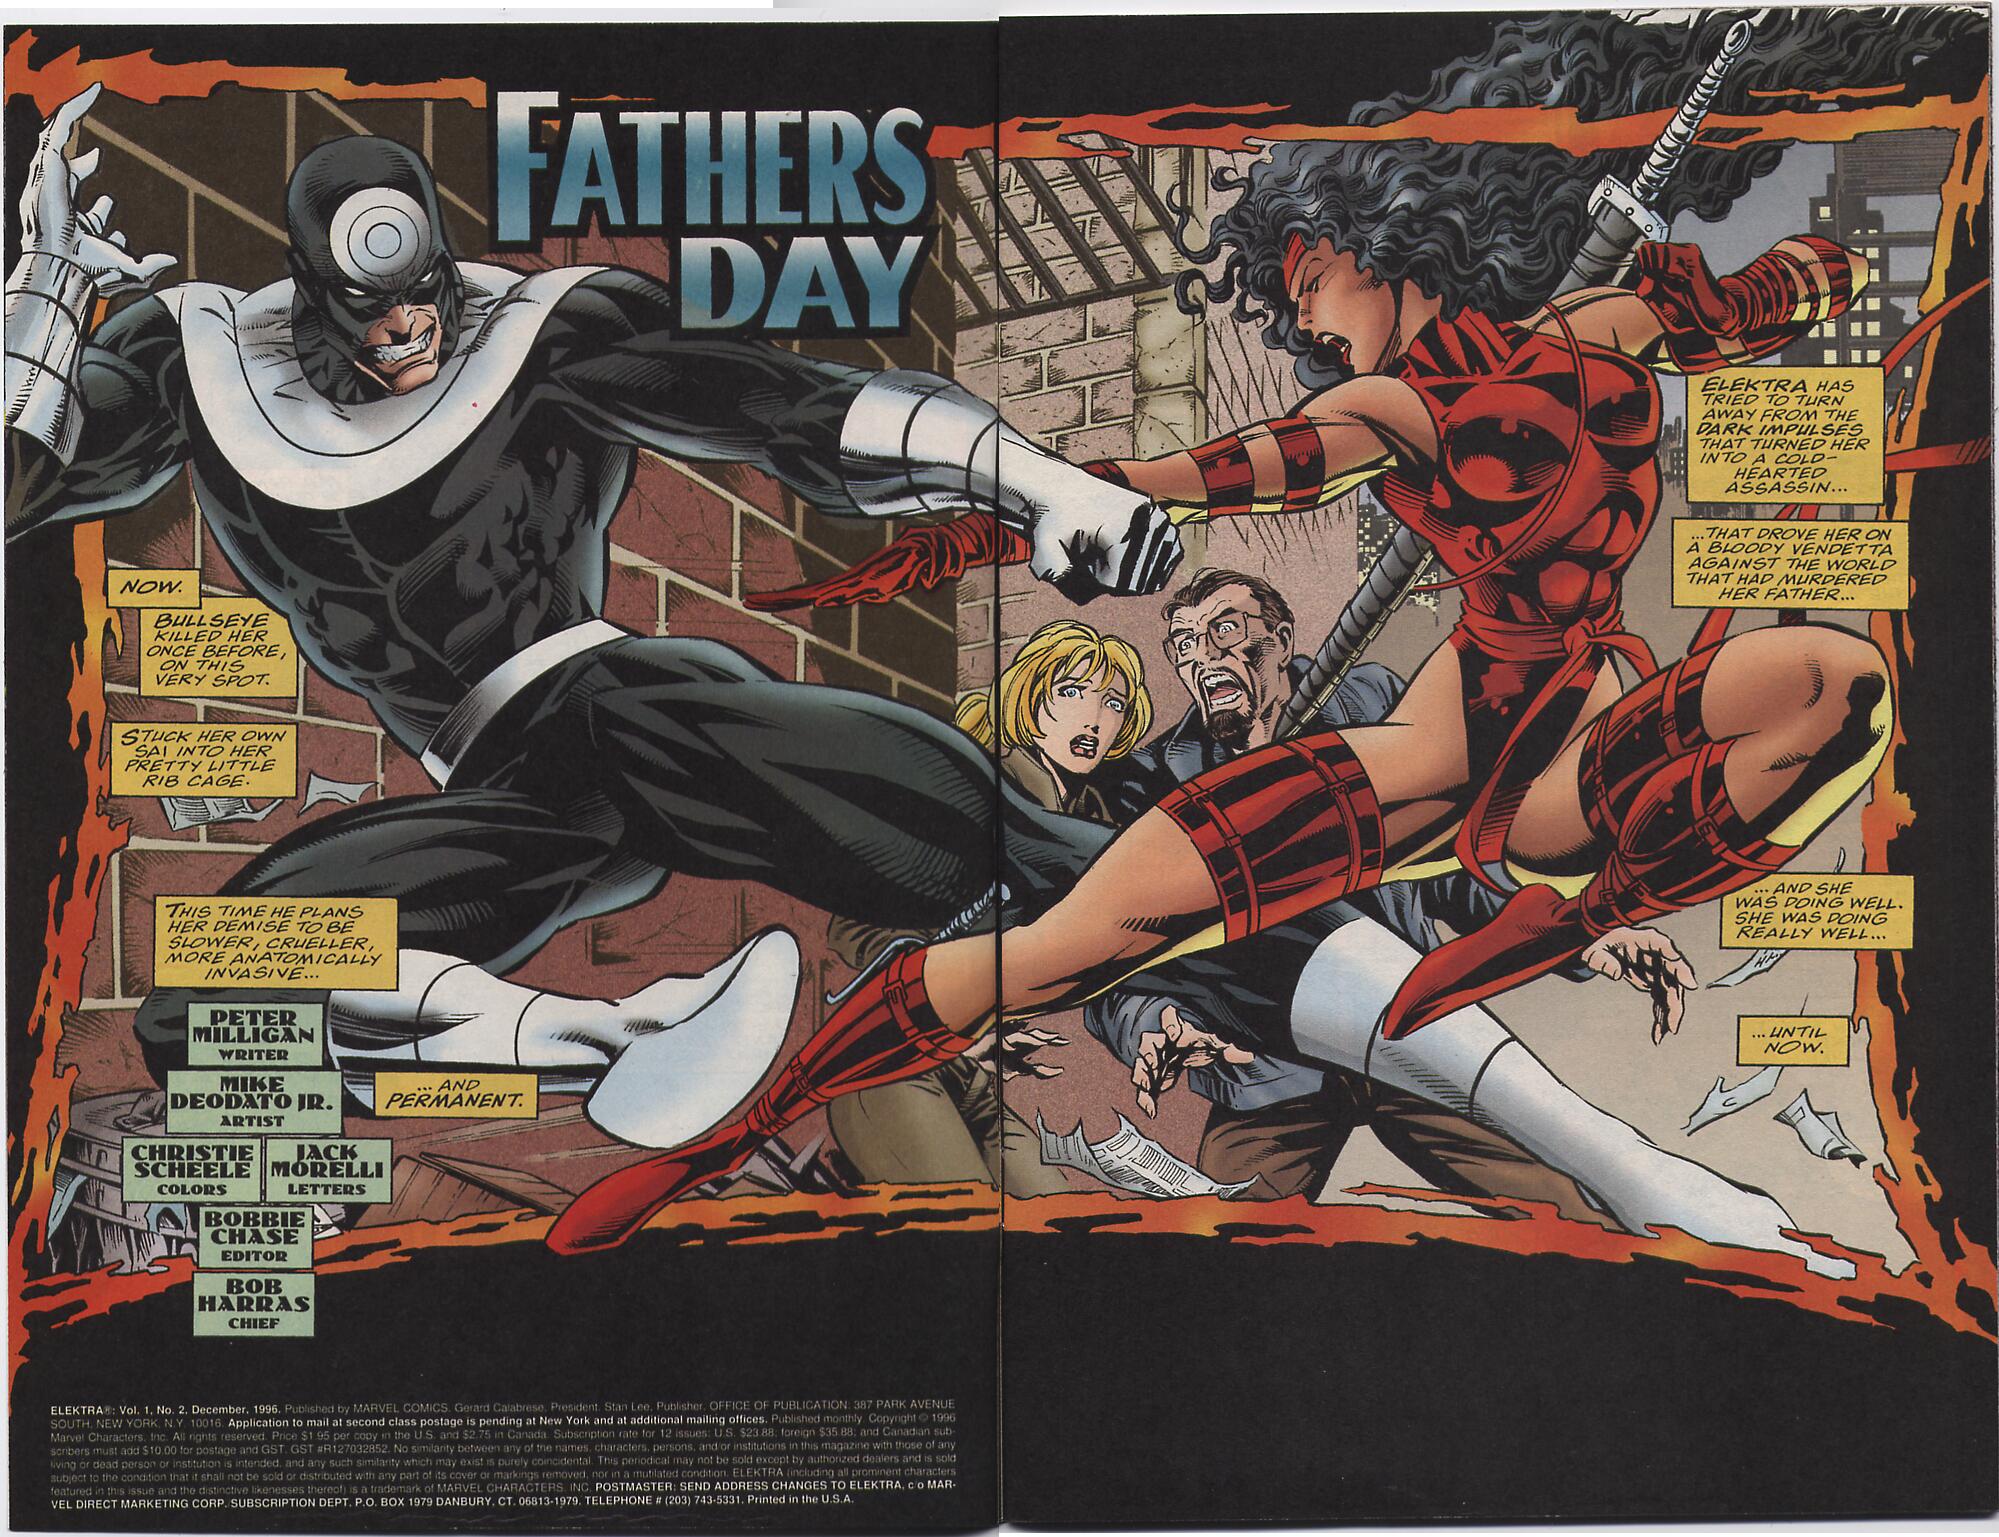 Elektra (1996) Issue #2 - Father's Day #3 - English 3